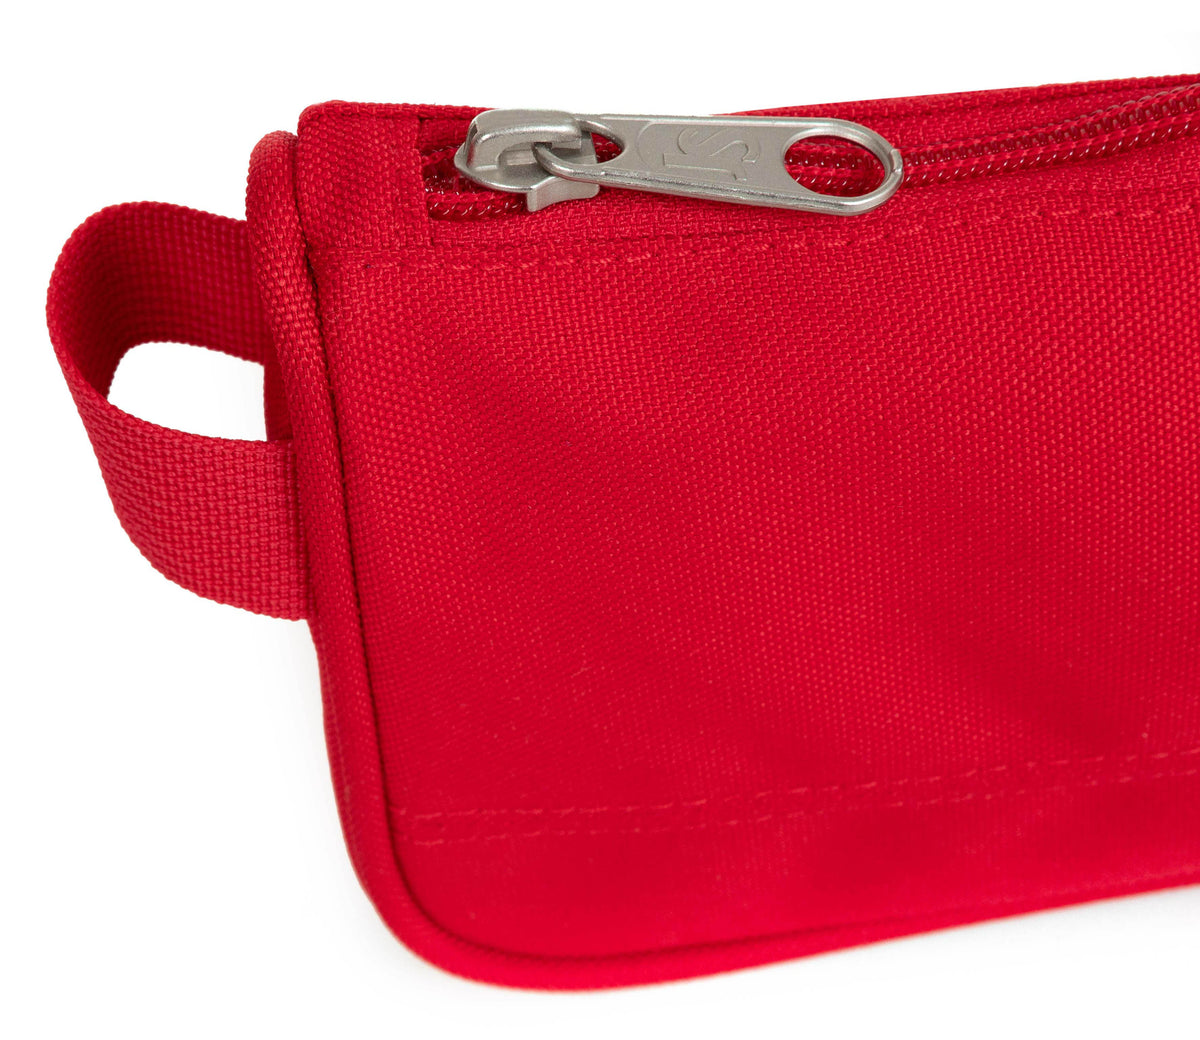 Jansport Medium Accessory Pouch Pencil Case - Red Tape